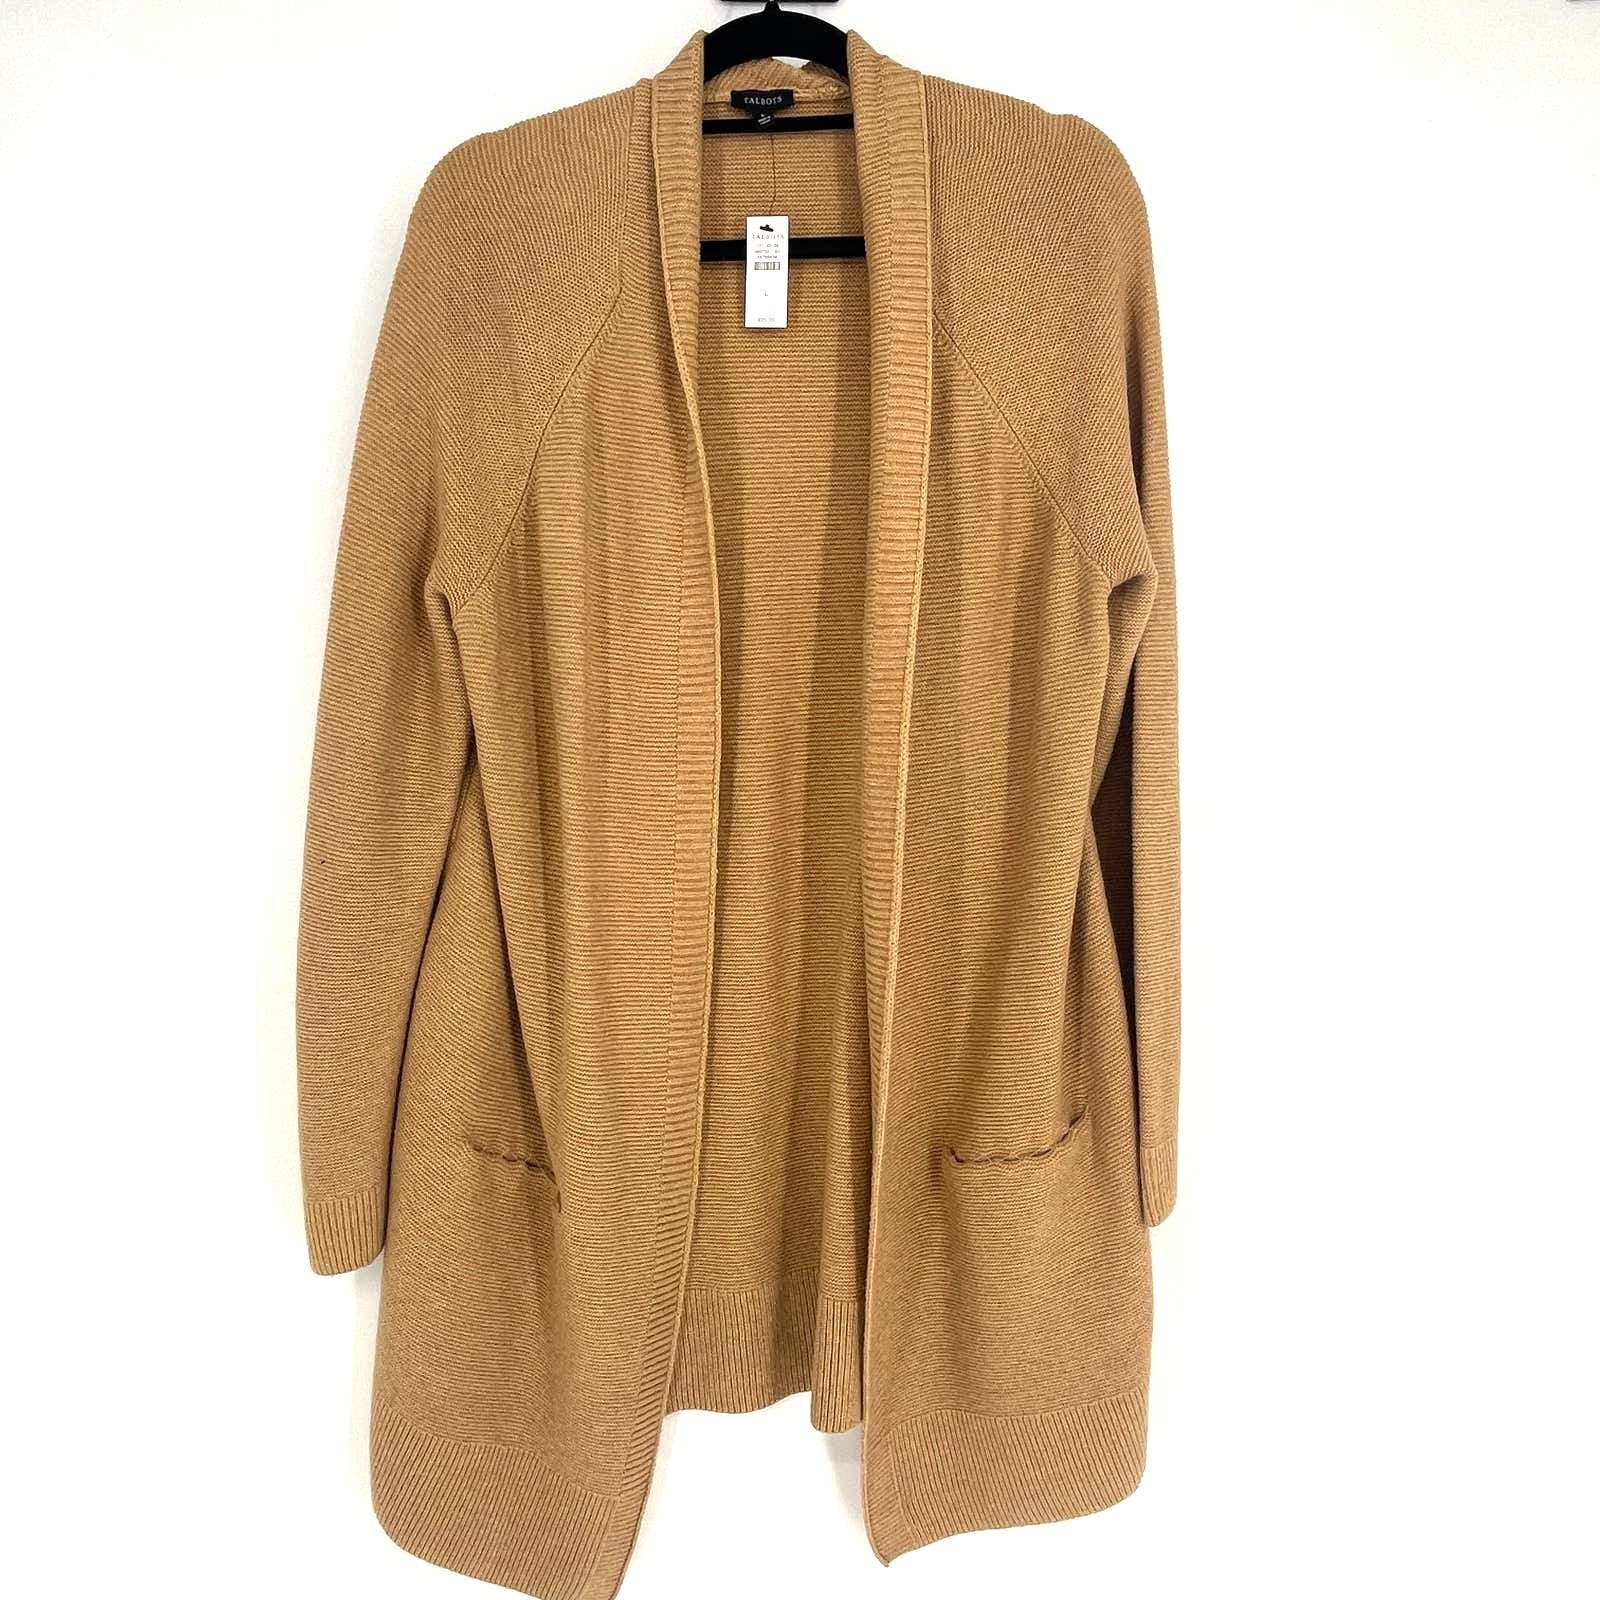 Special offer  Talbots Open Cardigan Size L NWT $99 pBOqTW8bw Discount